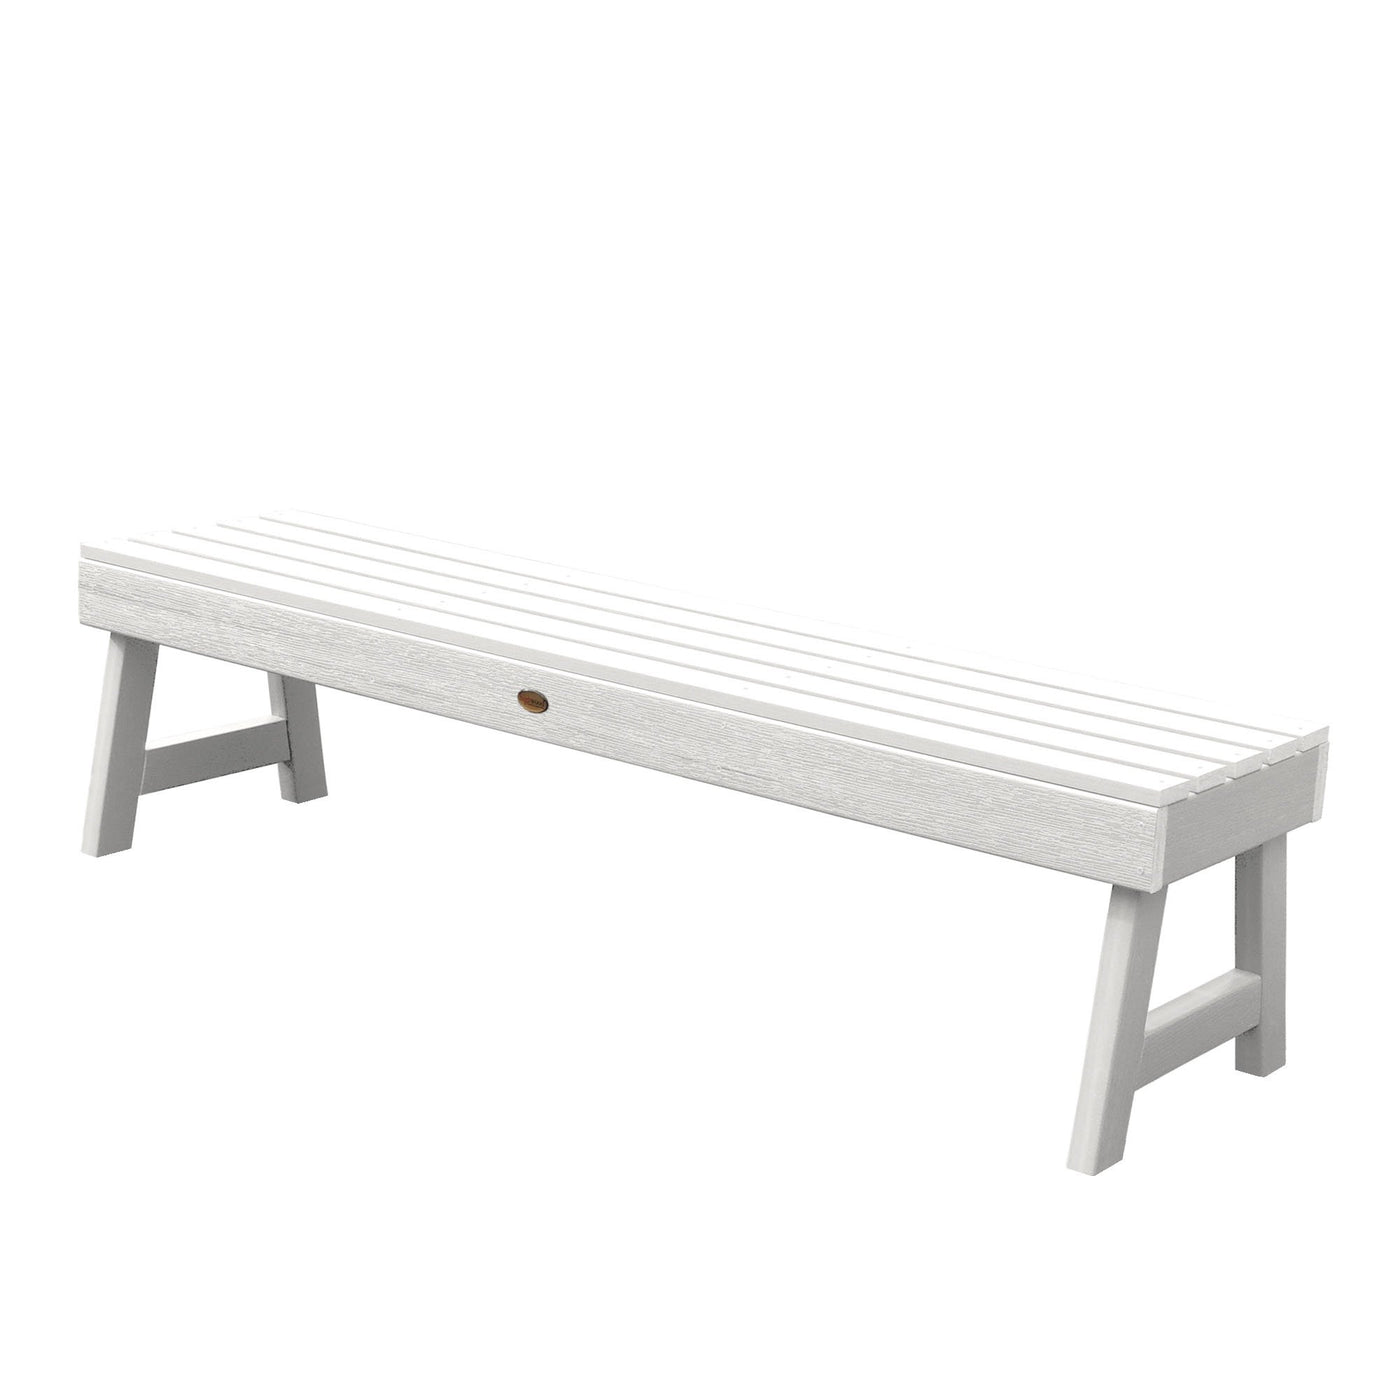 Weatherly Picnic Backless Bench - 5ft BenchSwing Highwood USA White 